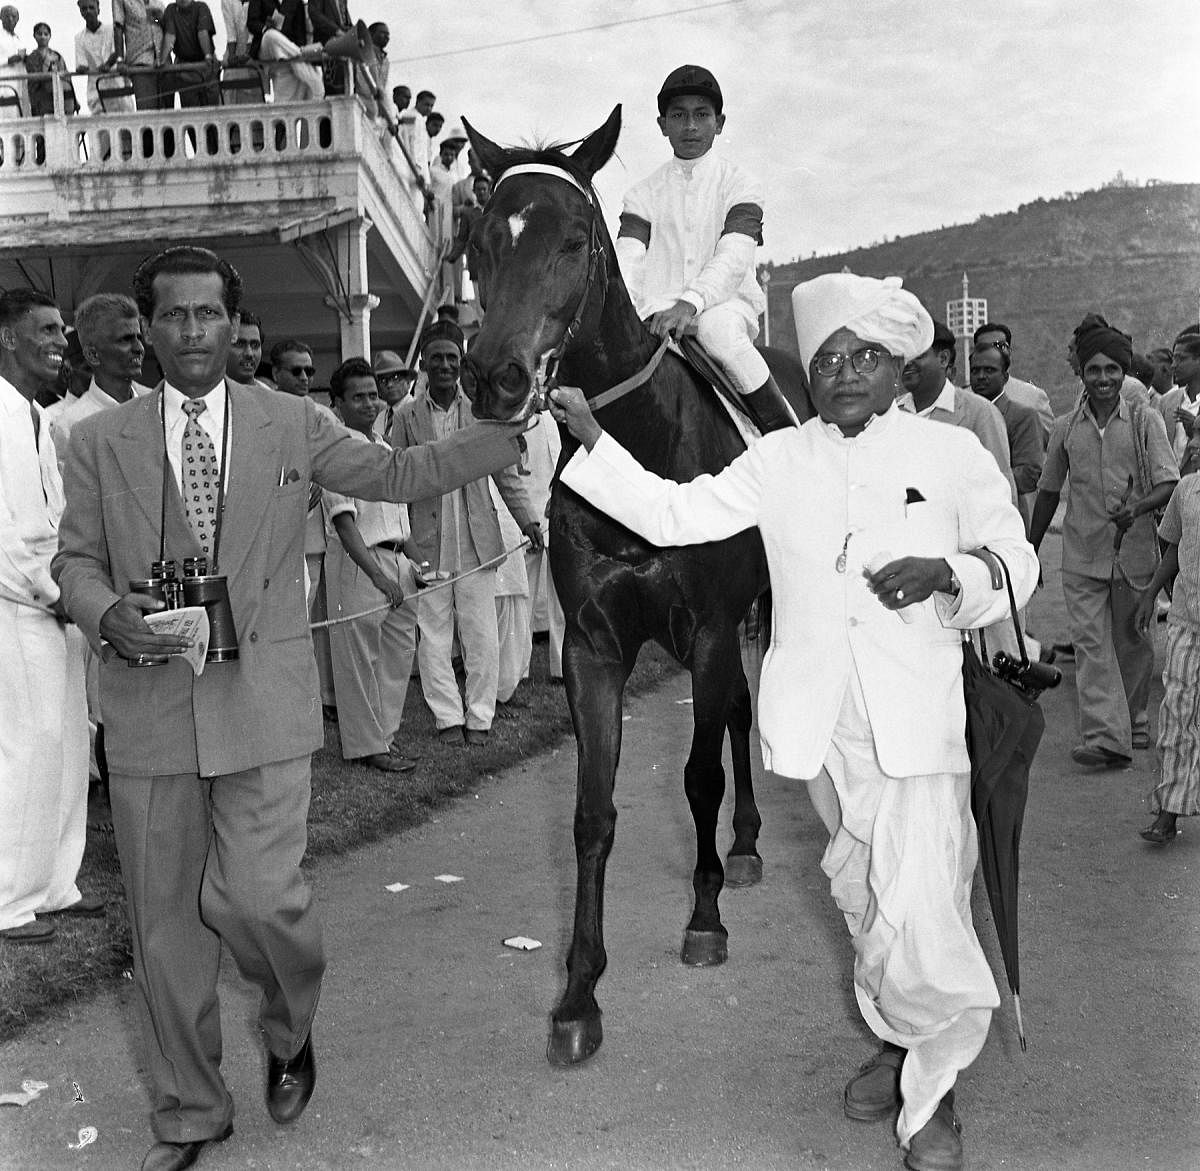 Grandfather leading a horse at the races